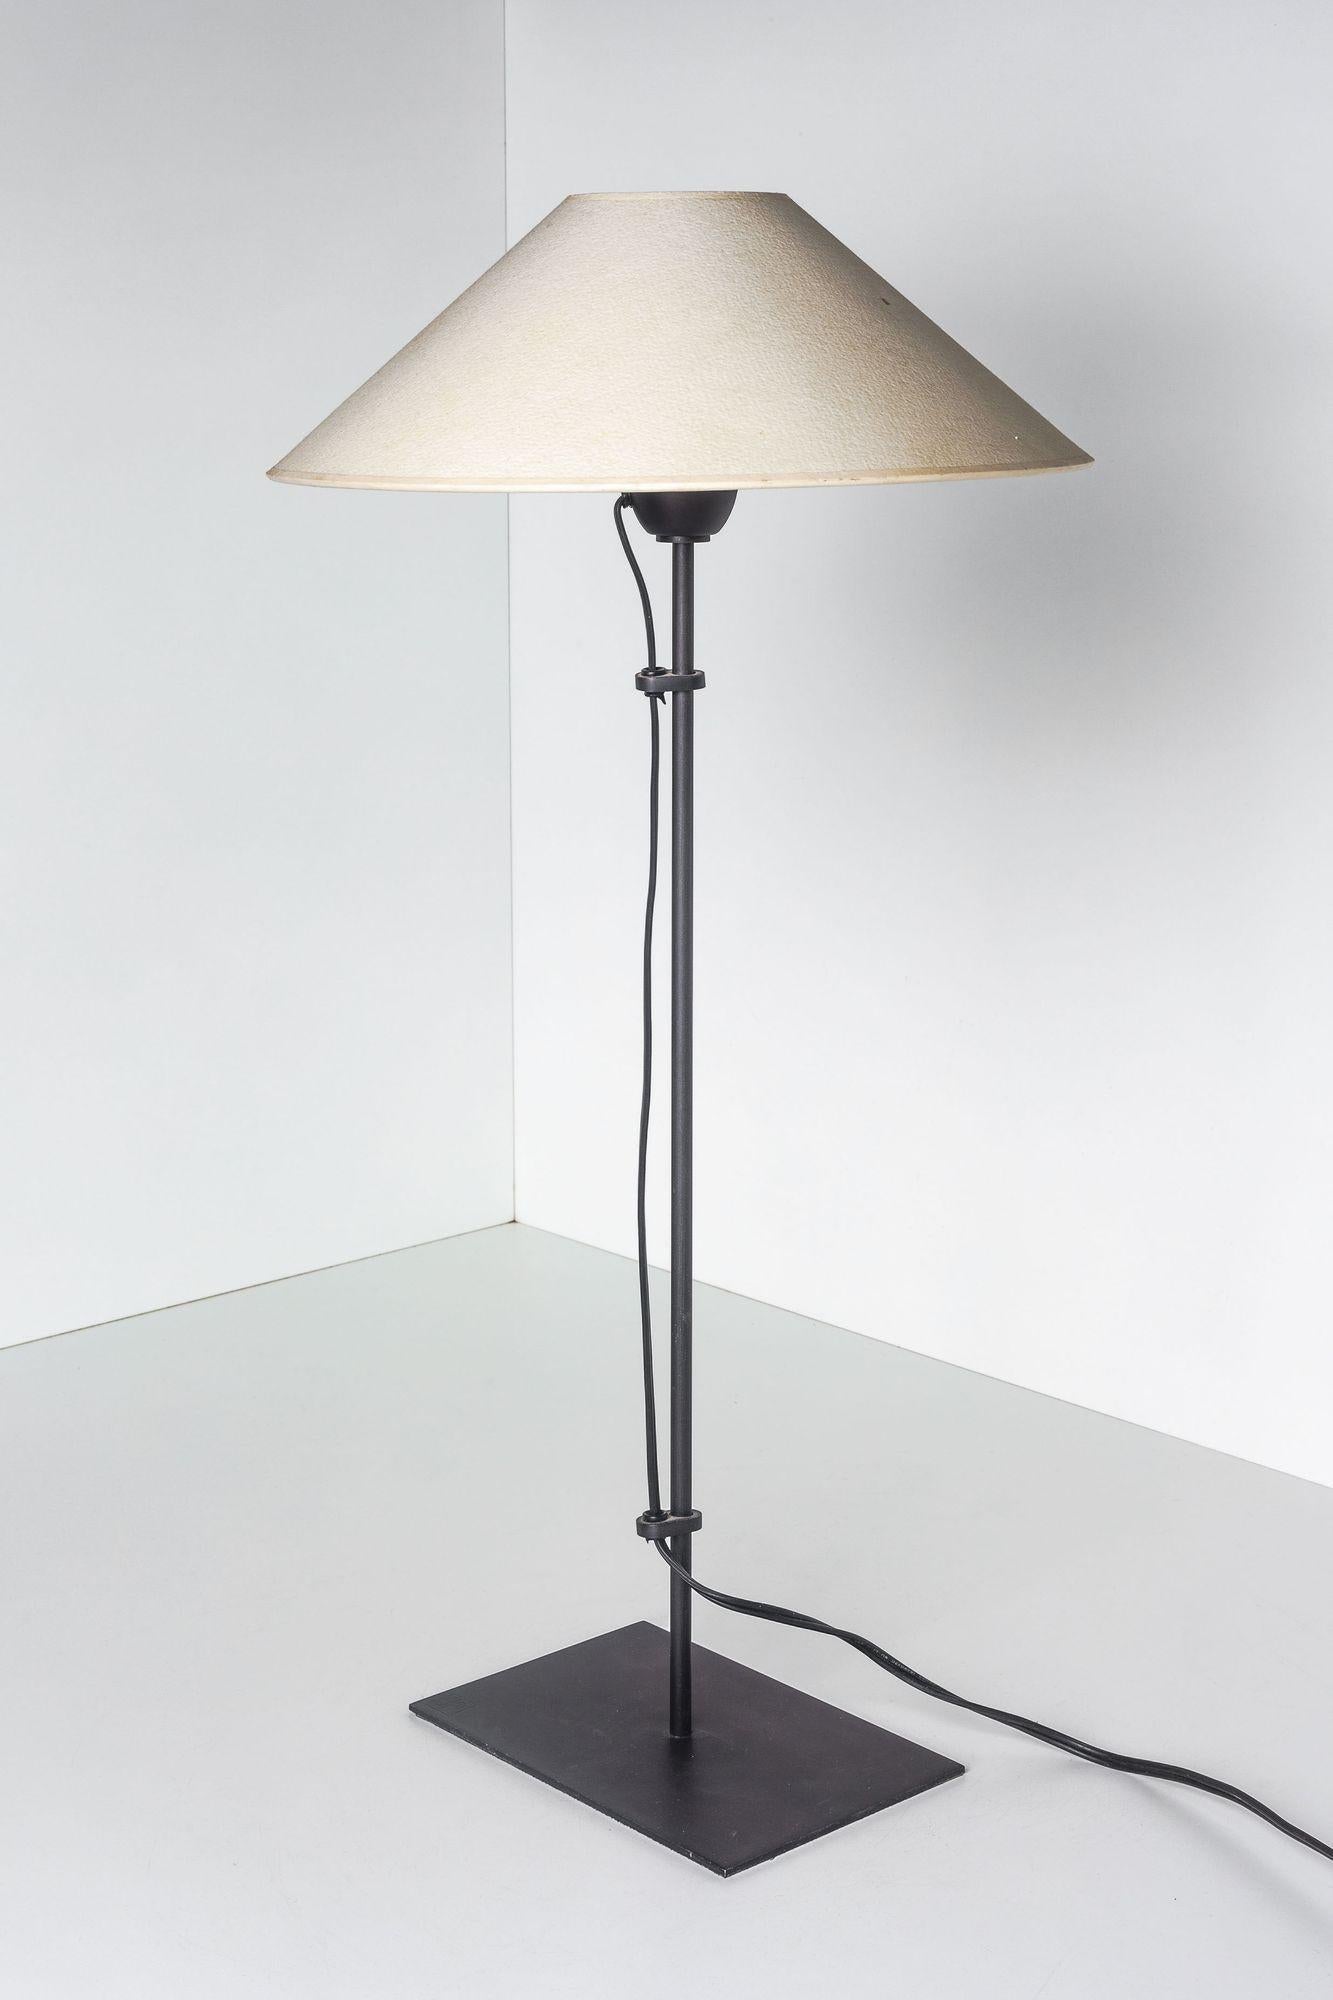 Christian Liaigre Acier Table Lamp, Bronze-painted metal spine with exposed cord power source and original paper cone-shaped shade.

This Bronze brass lamp blends in with all types of interiors, from the most modern to the most classic. It can find